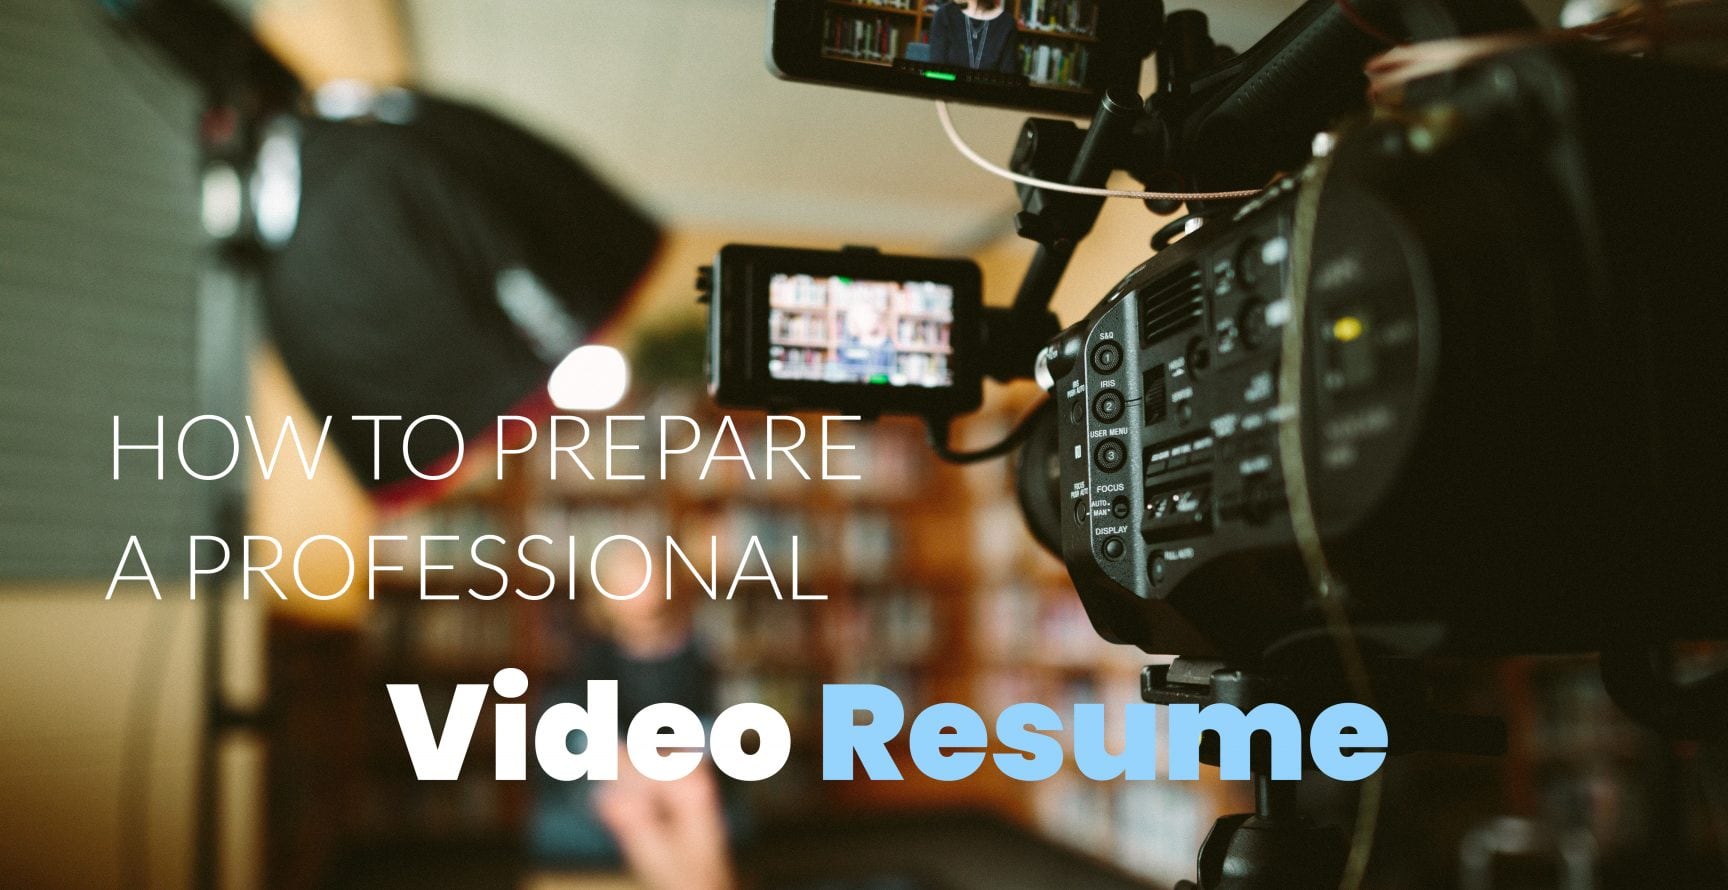 How to prepare a professional video resume - camera records woman